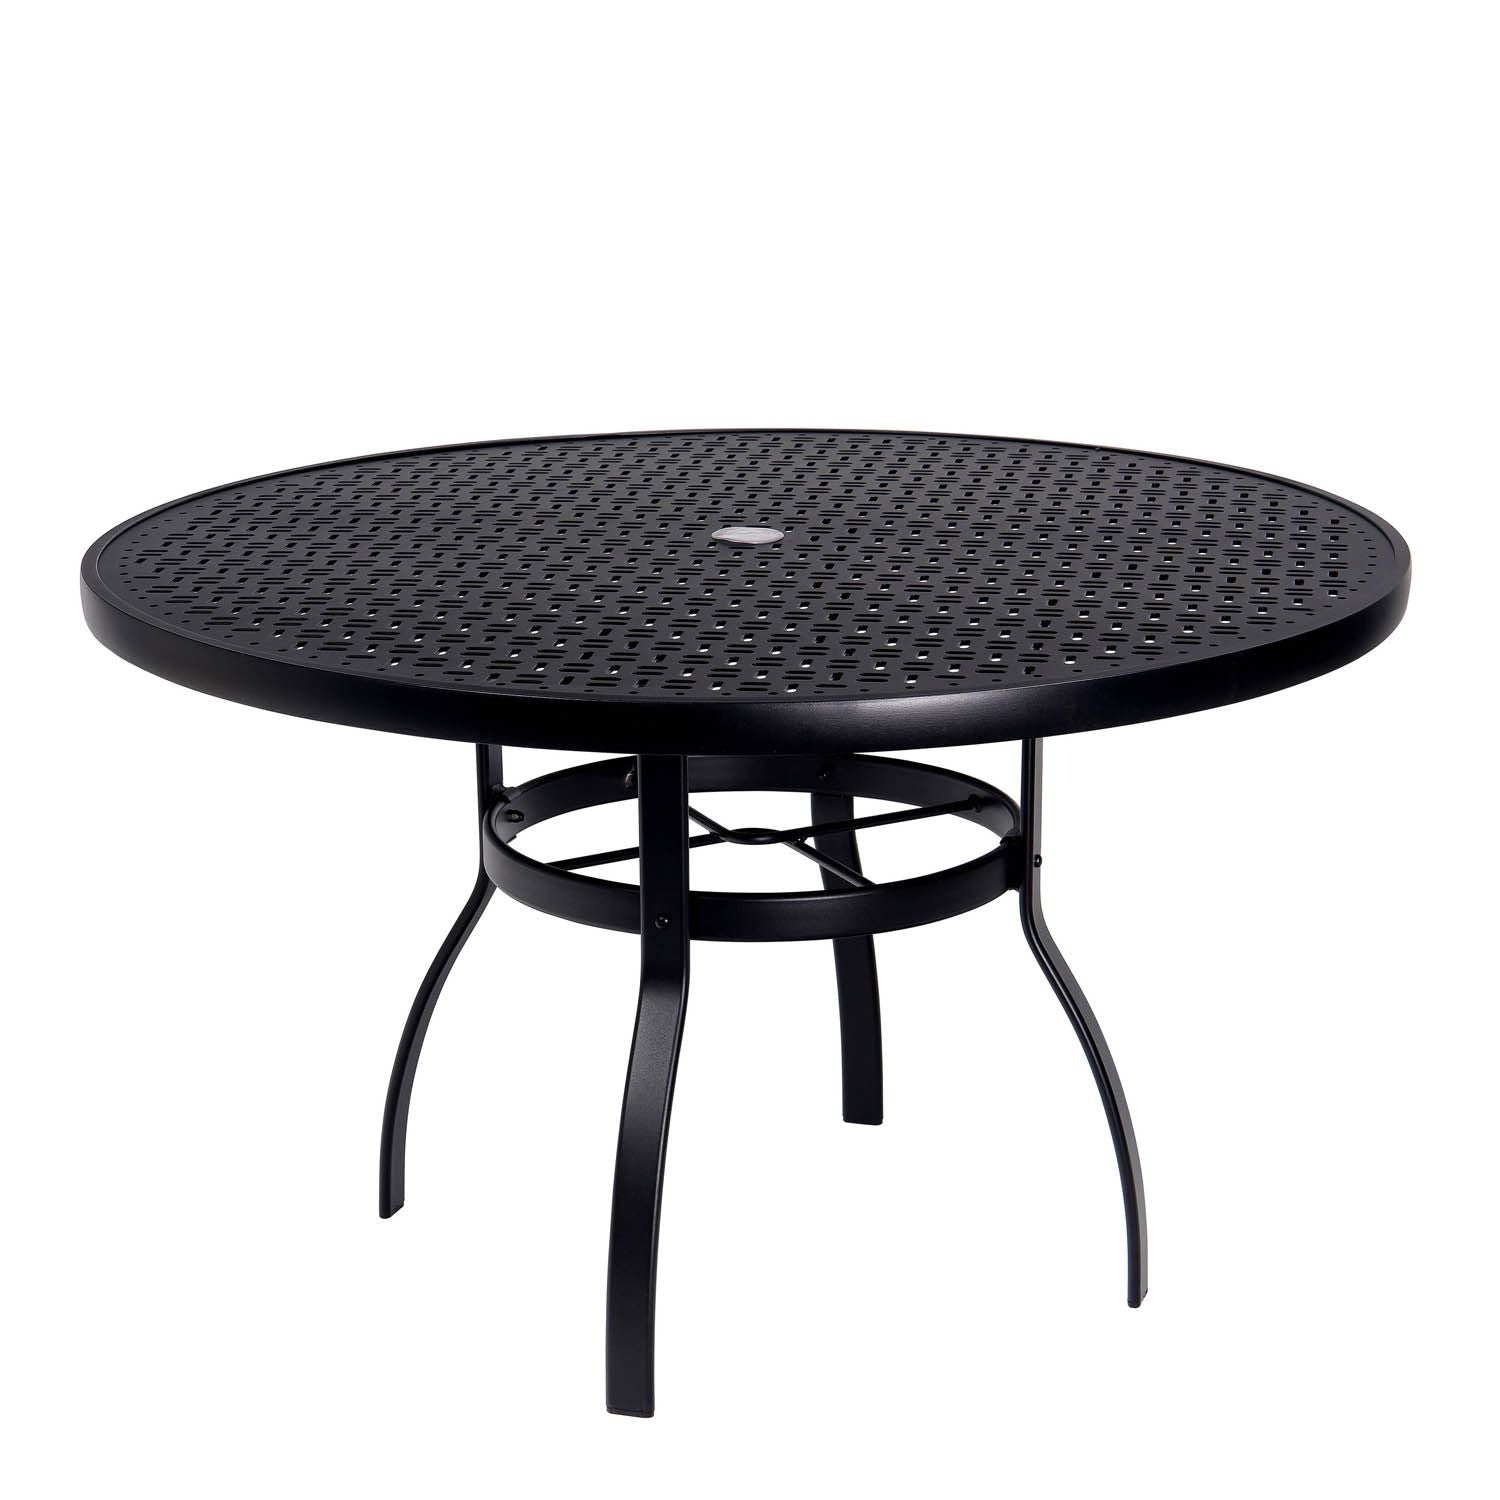 Woodard Deluxe Complete 48in Round Dining Table with Lattice Top in Aztec Bronze Finish 12033983